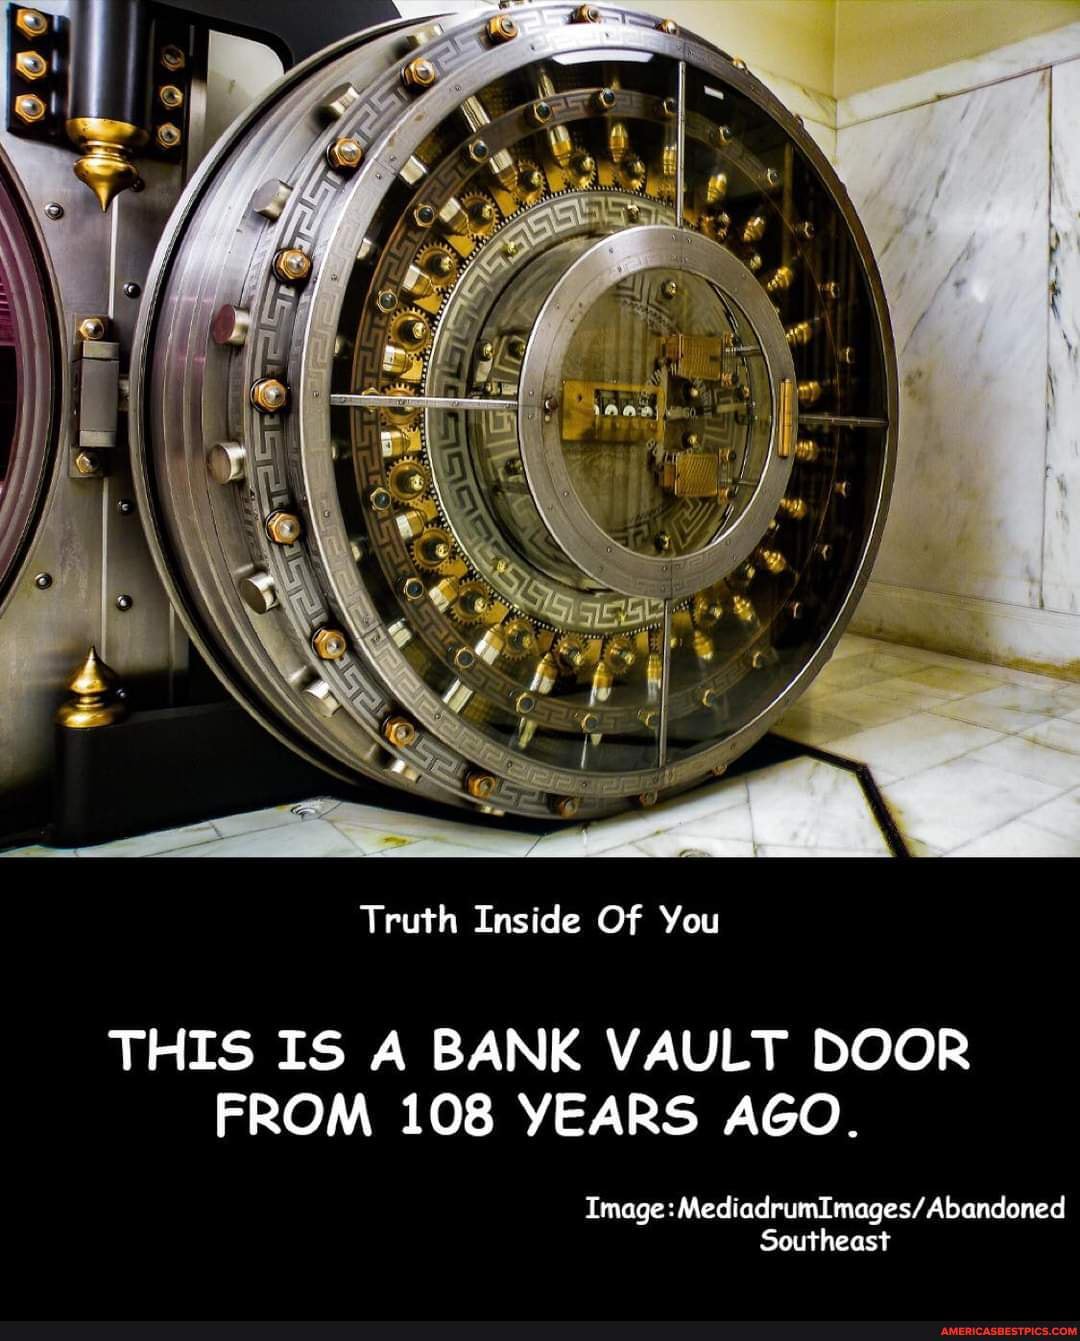 roddel Implicaties test Truth Inside Of You THIS IS A BANK VAULT DOOR FROM 108 YEARS AGO. Image:  MediadrumImages/ Abandoned Southeast - America's best pics and videos